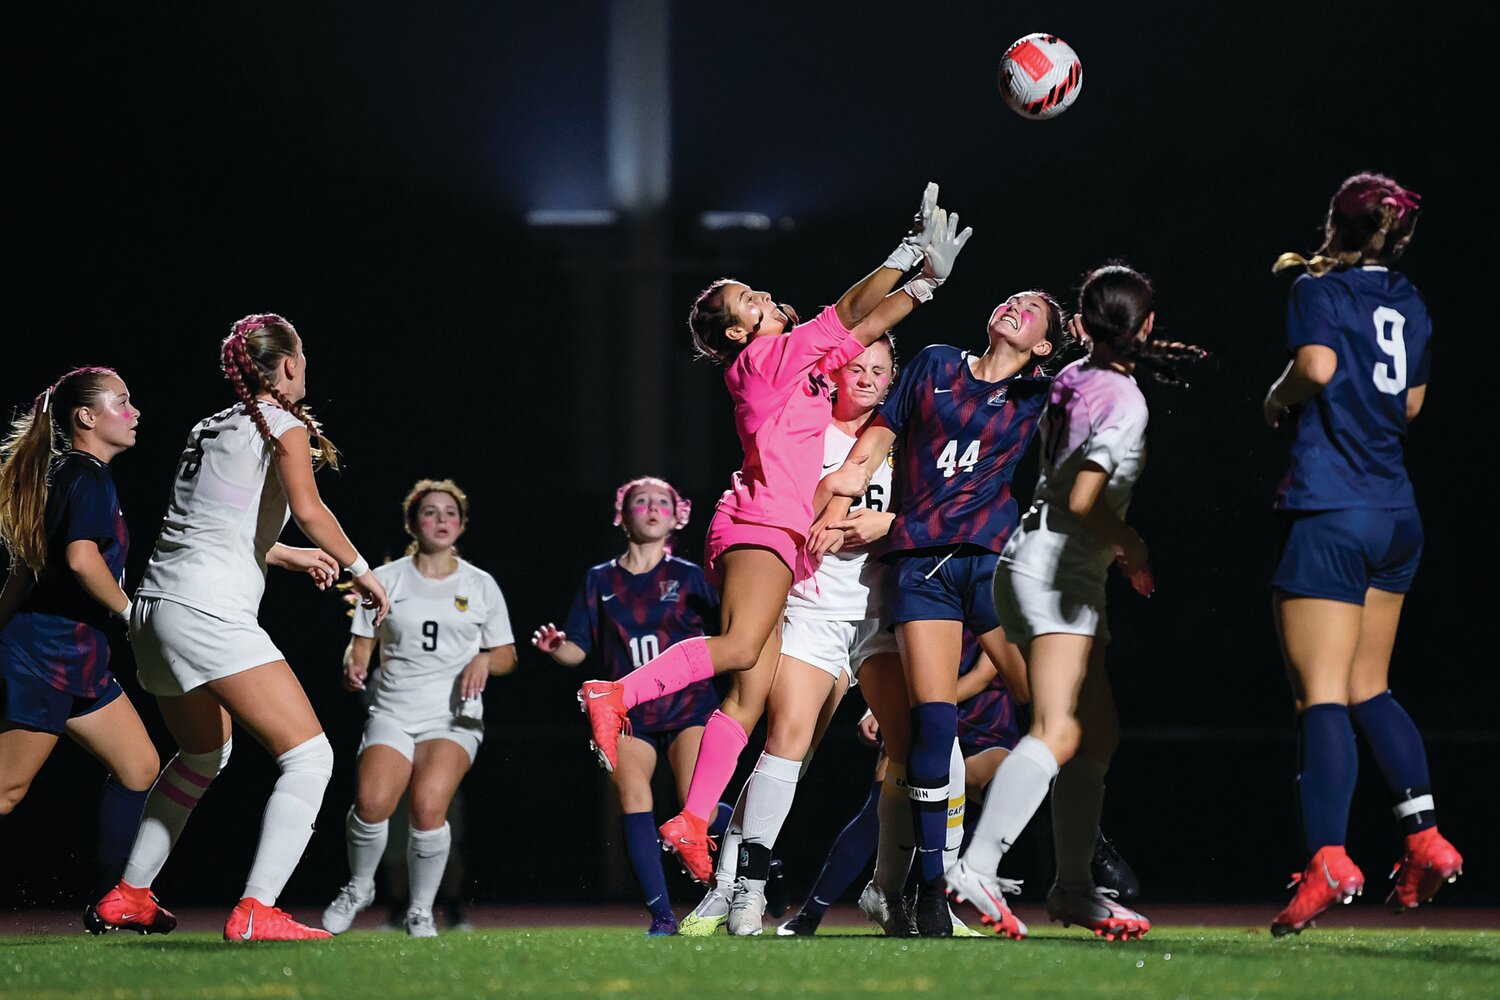 CB West goalie Camryn Nocito clears a corner kick in front of the goal during second half action.